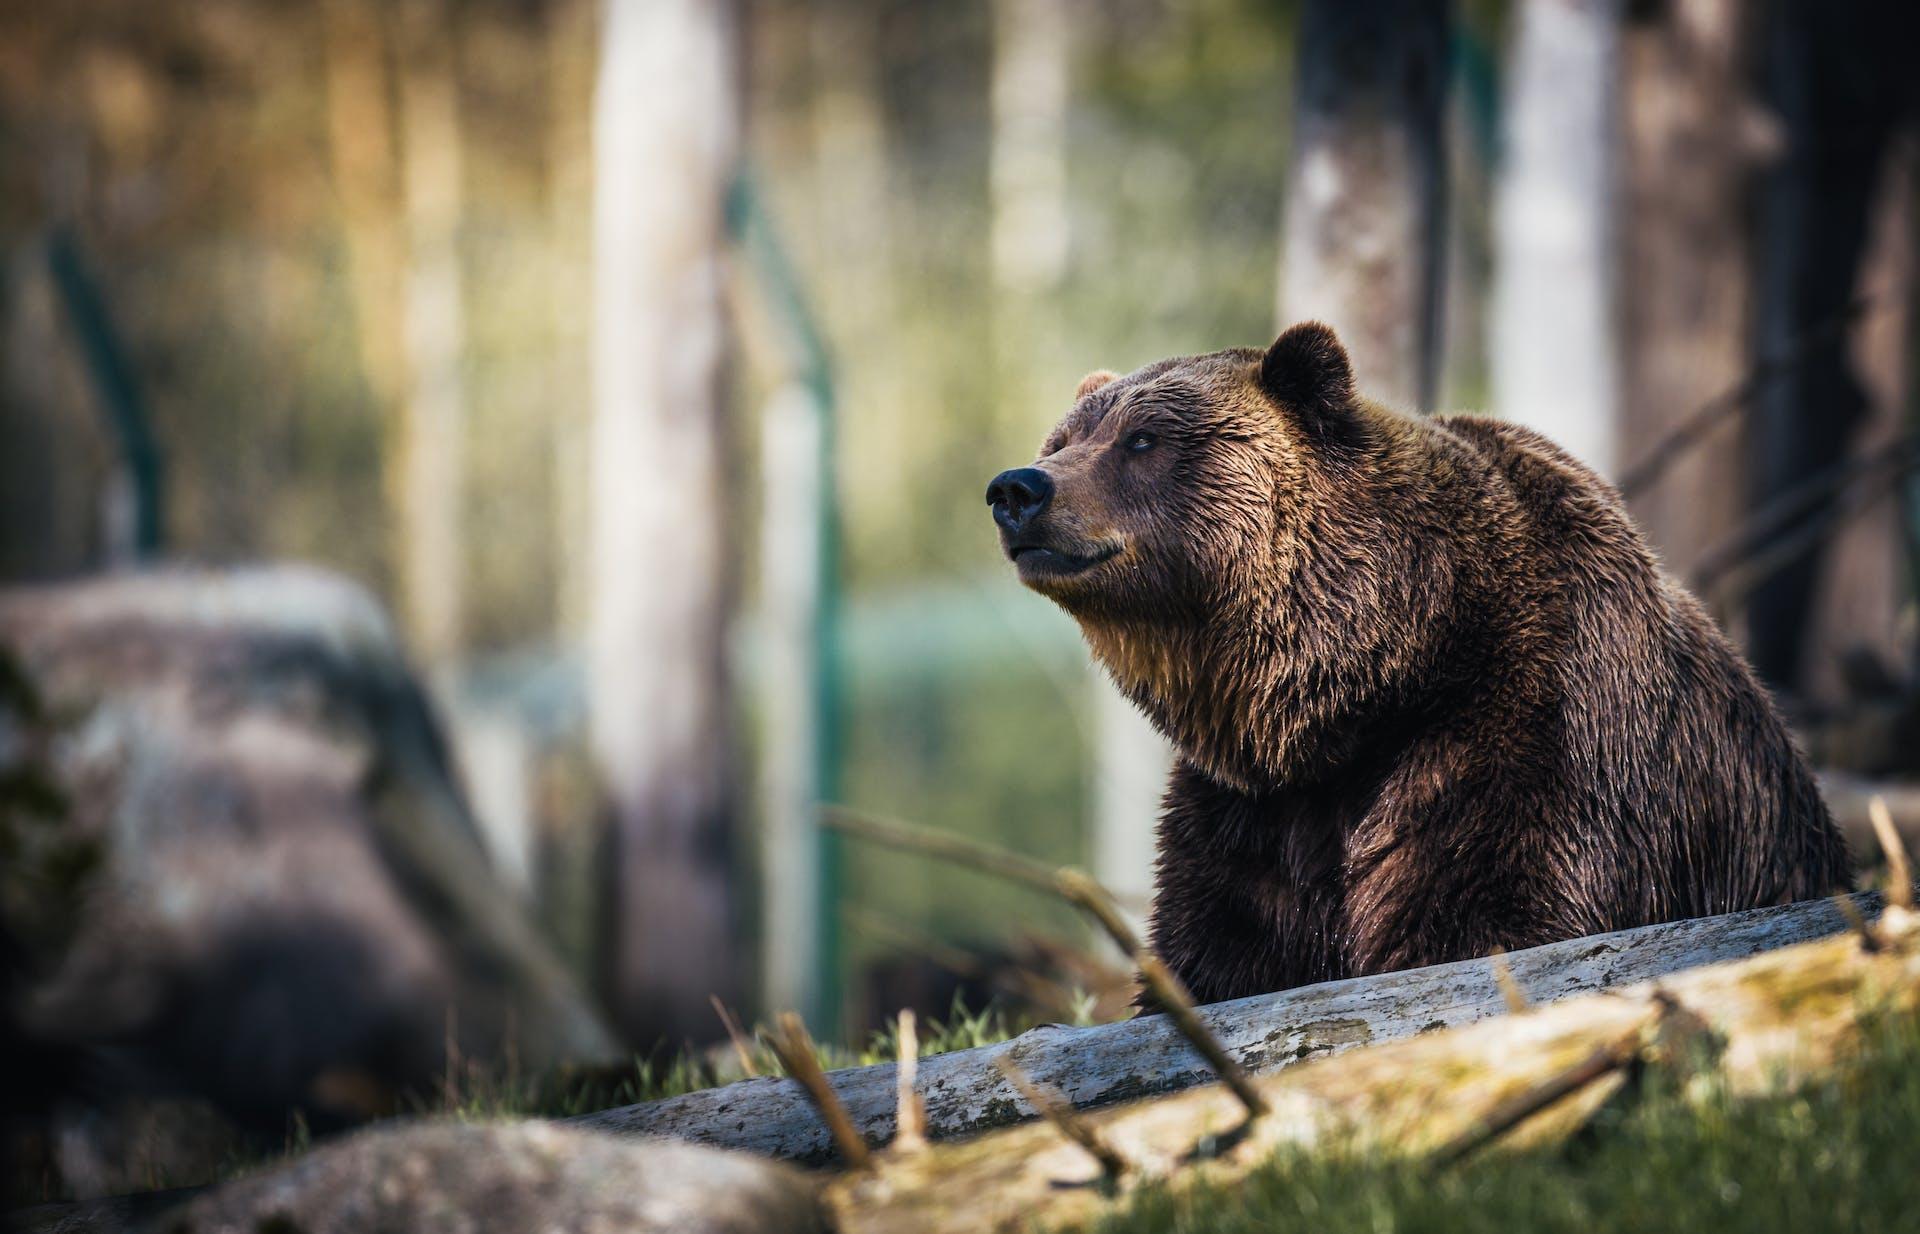 Man Narrates Bear ATTACK After Narrowly Escaping With His Life